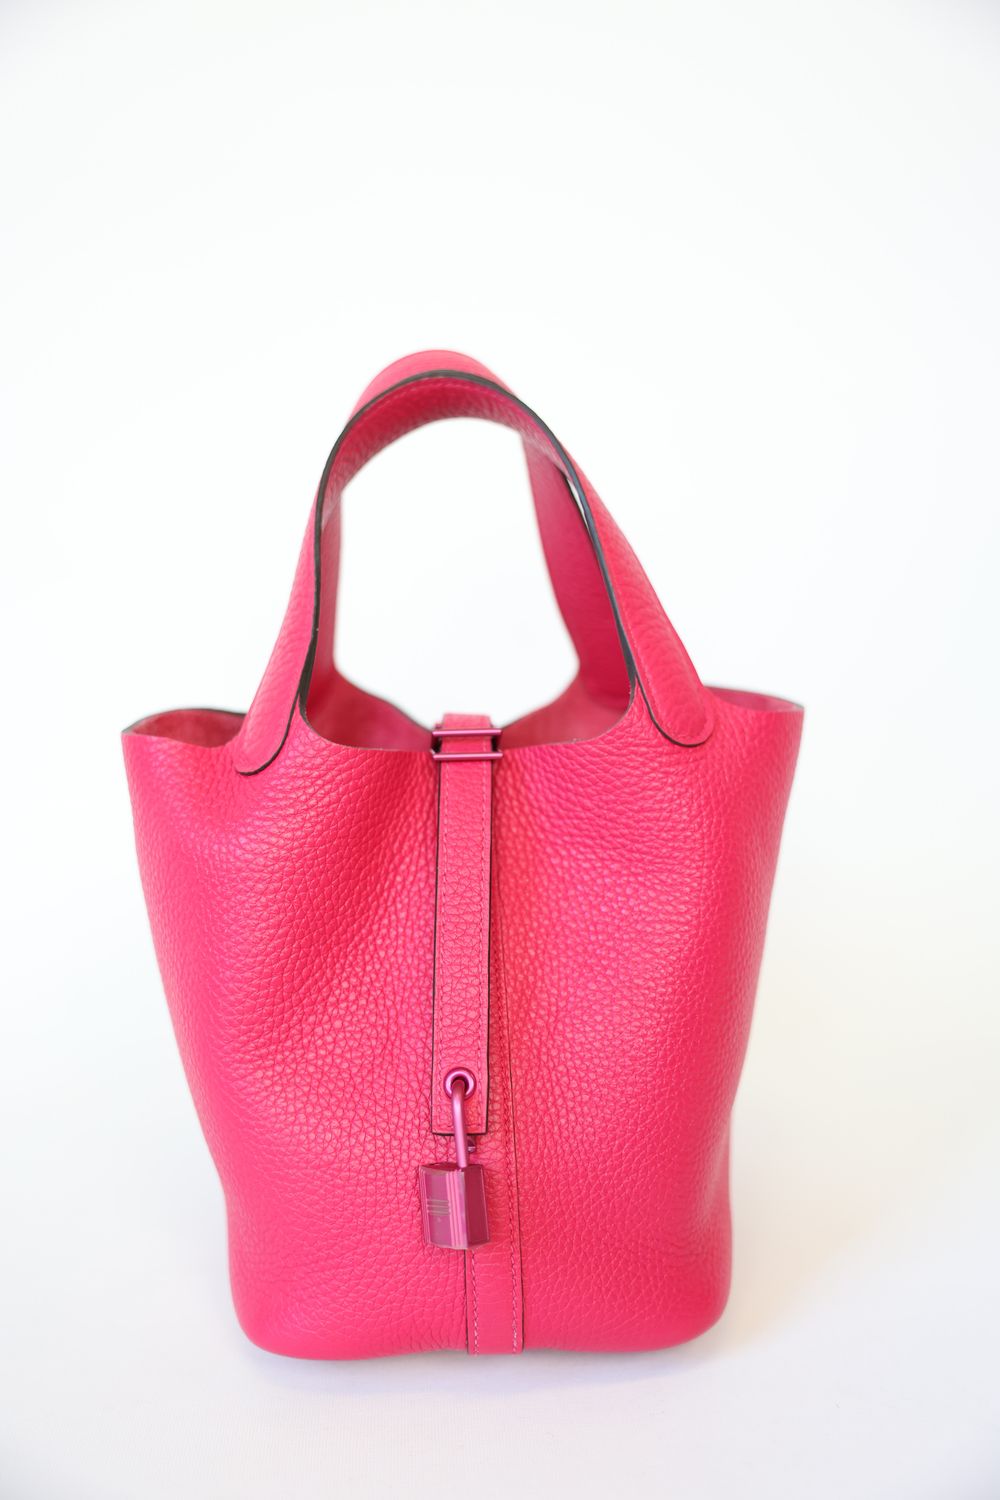 Hermes Picotin 18 PM, Rose Mexico Clemence With Pink Hardware, Preowned In Box WA001